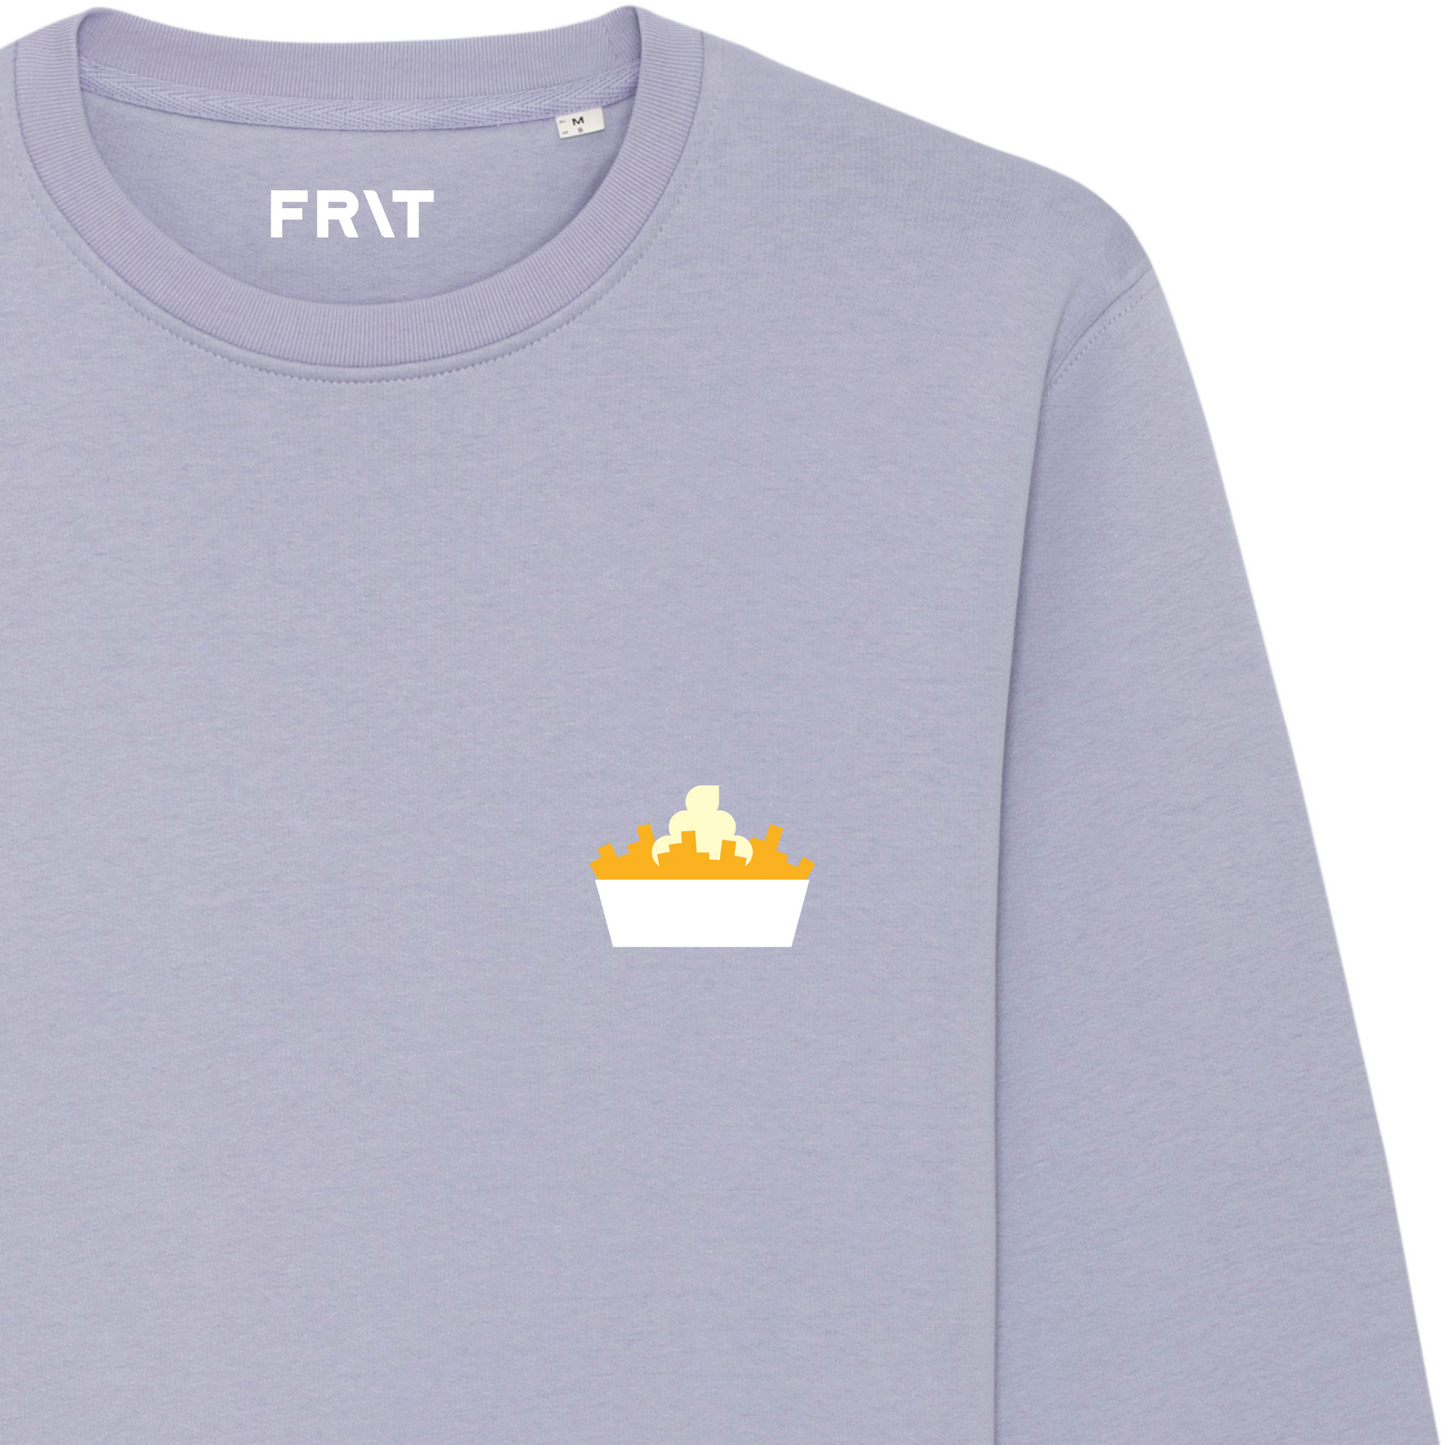 Sweater friet met mayonaise FRIT